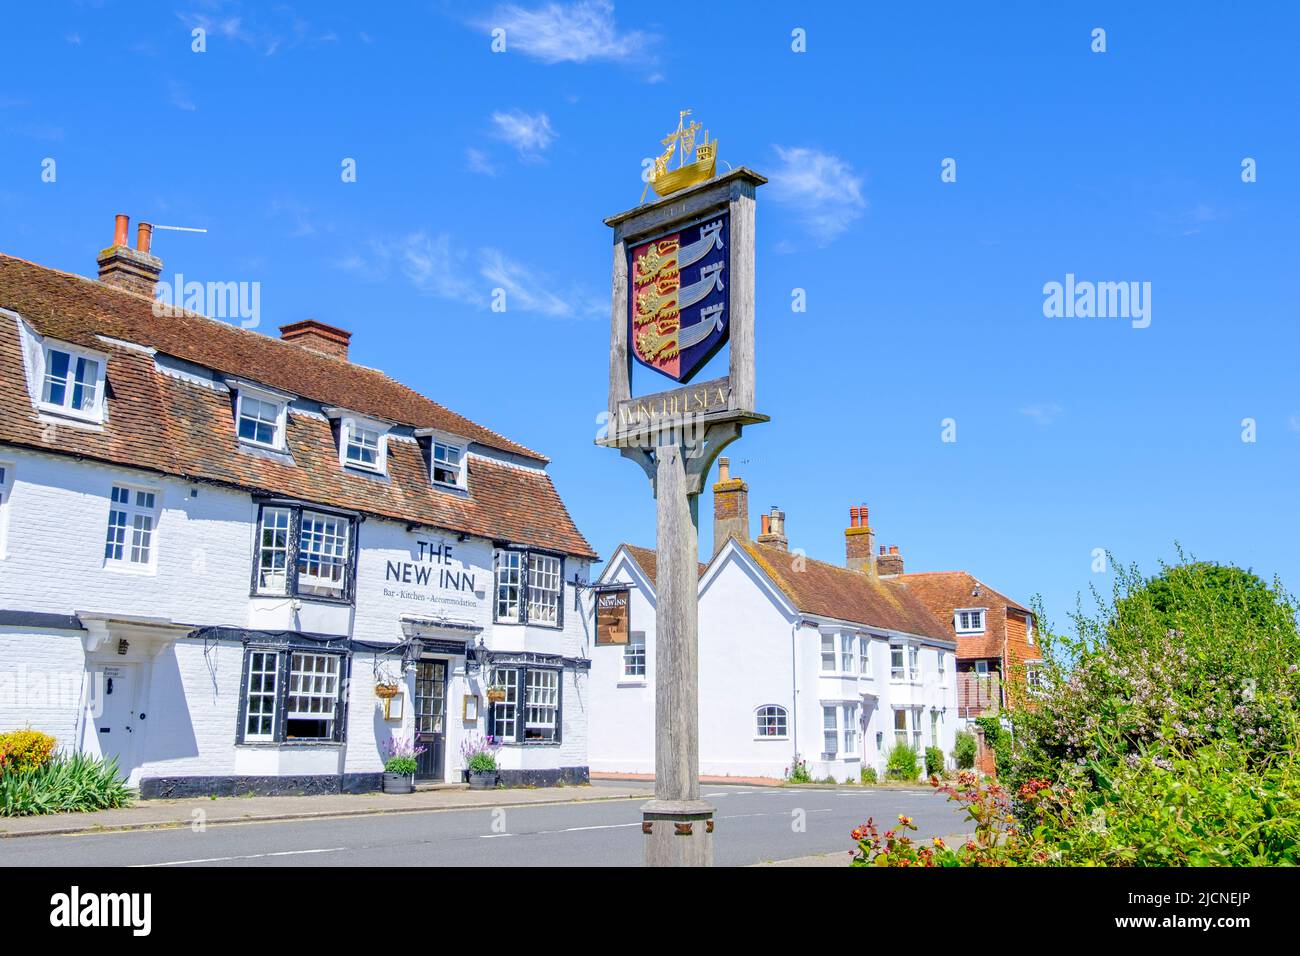 The New Inn, Winchelsea, East Sussex, UK Stock Photo